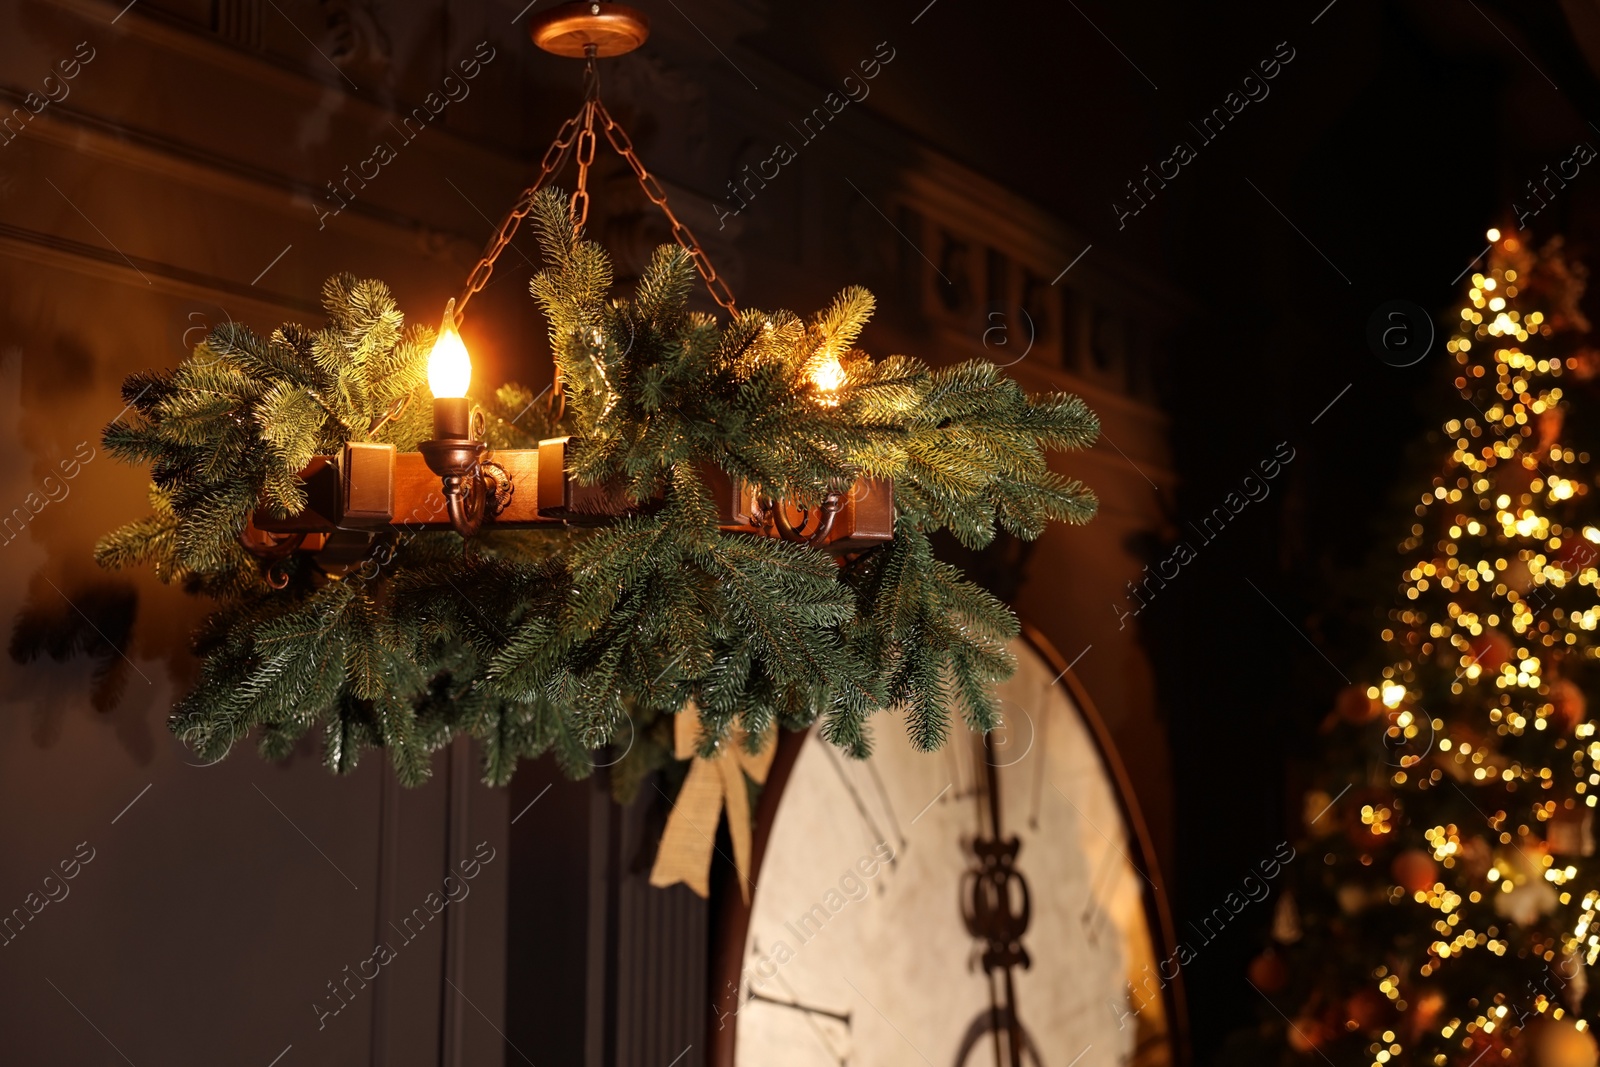 Photo of Vintage chandelier decorated with fir branches on ceiling and Christmas tree in room